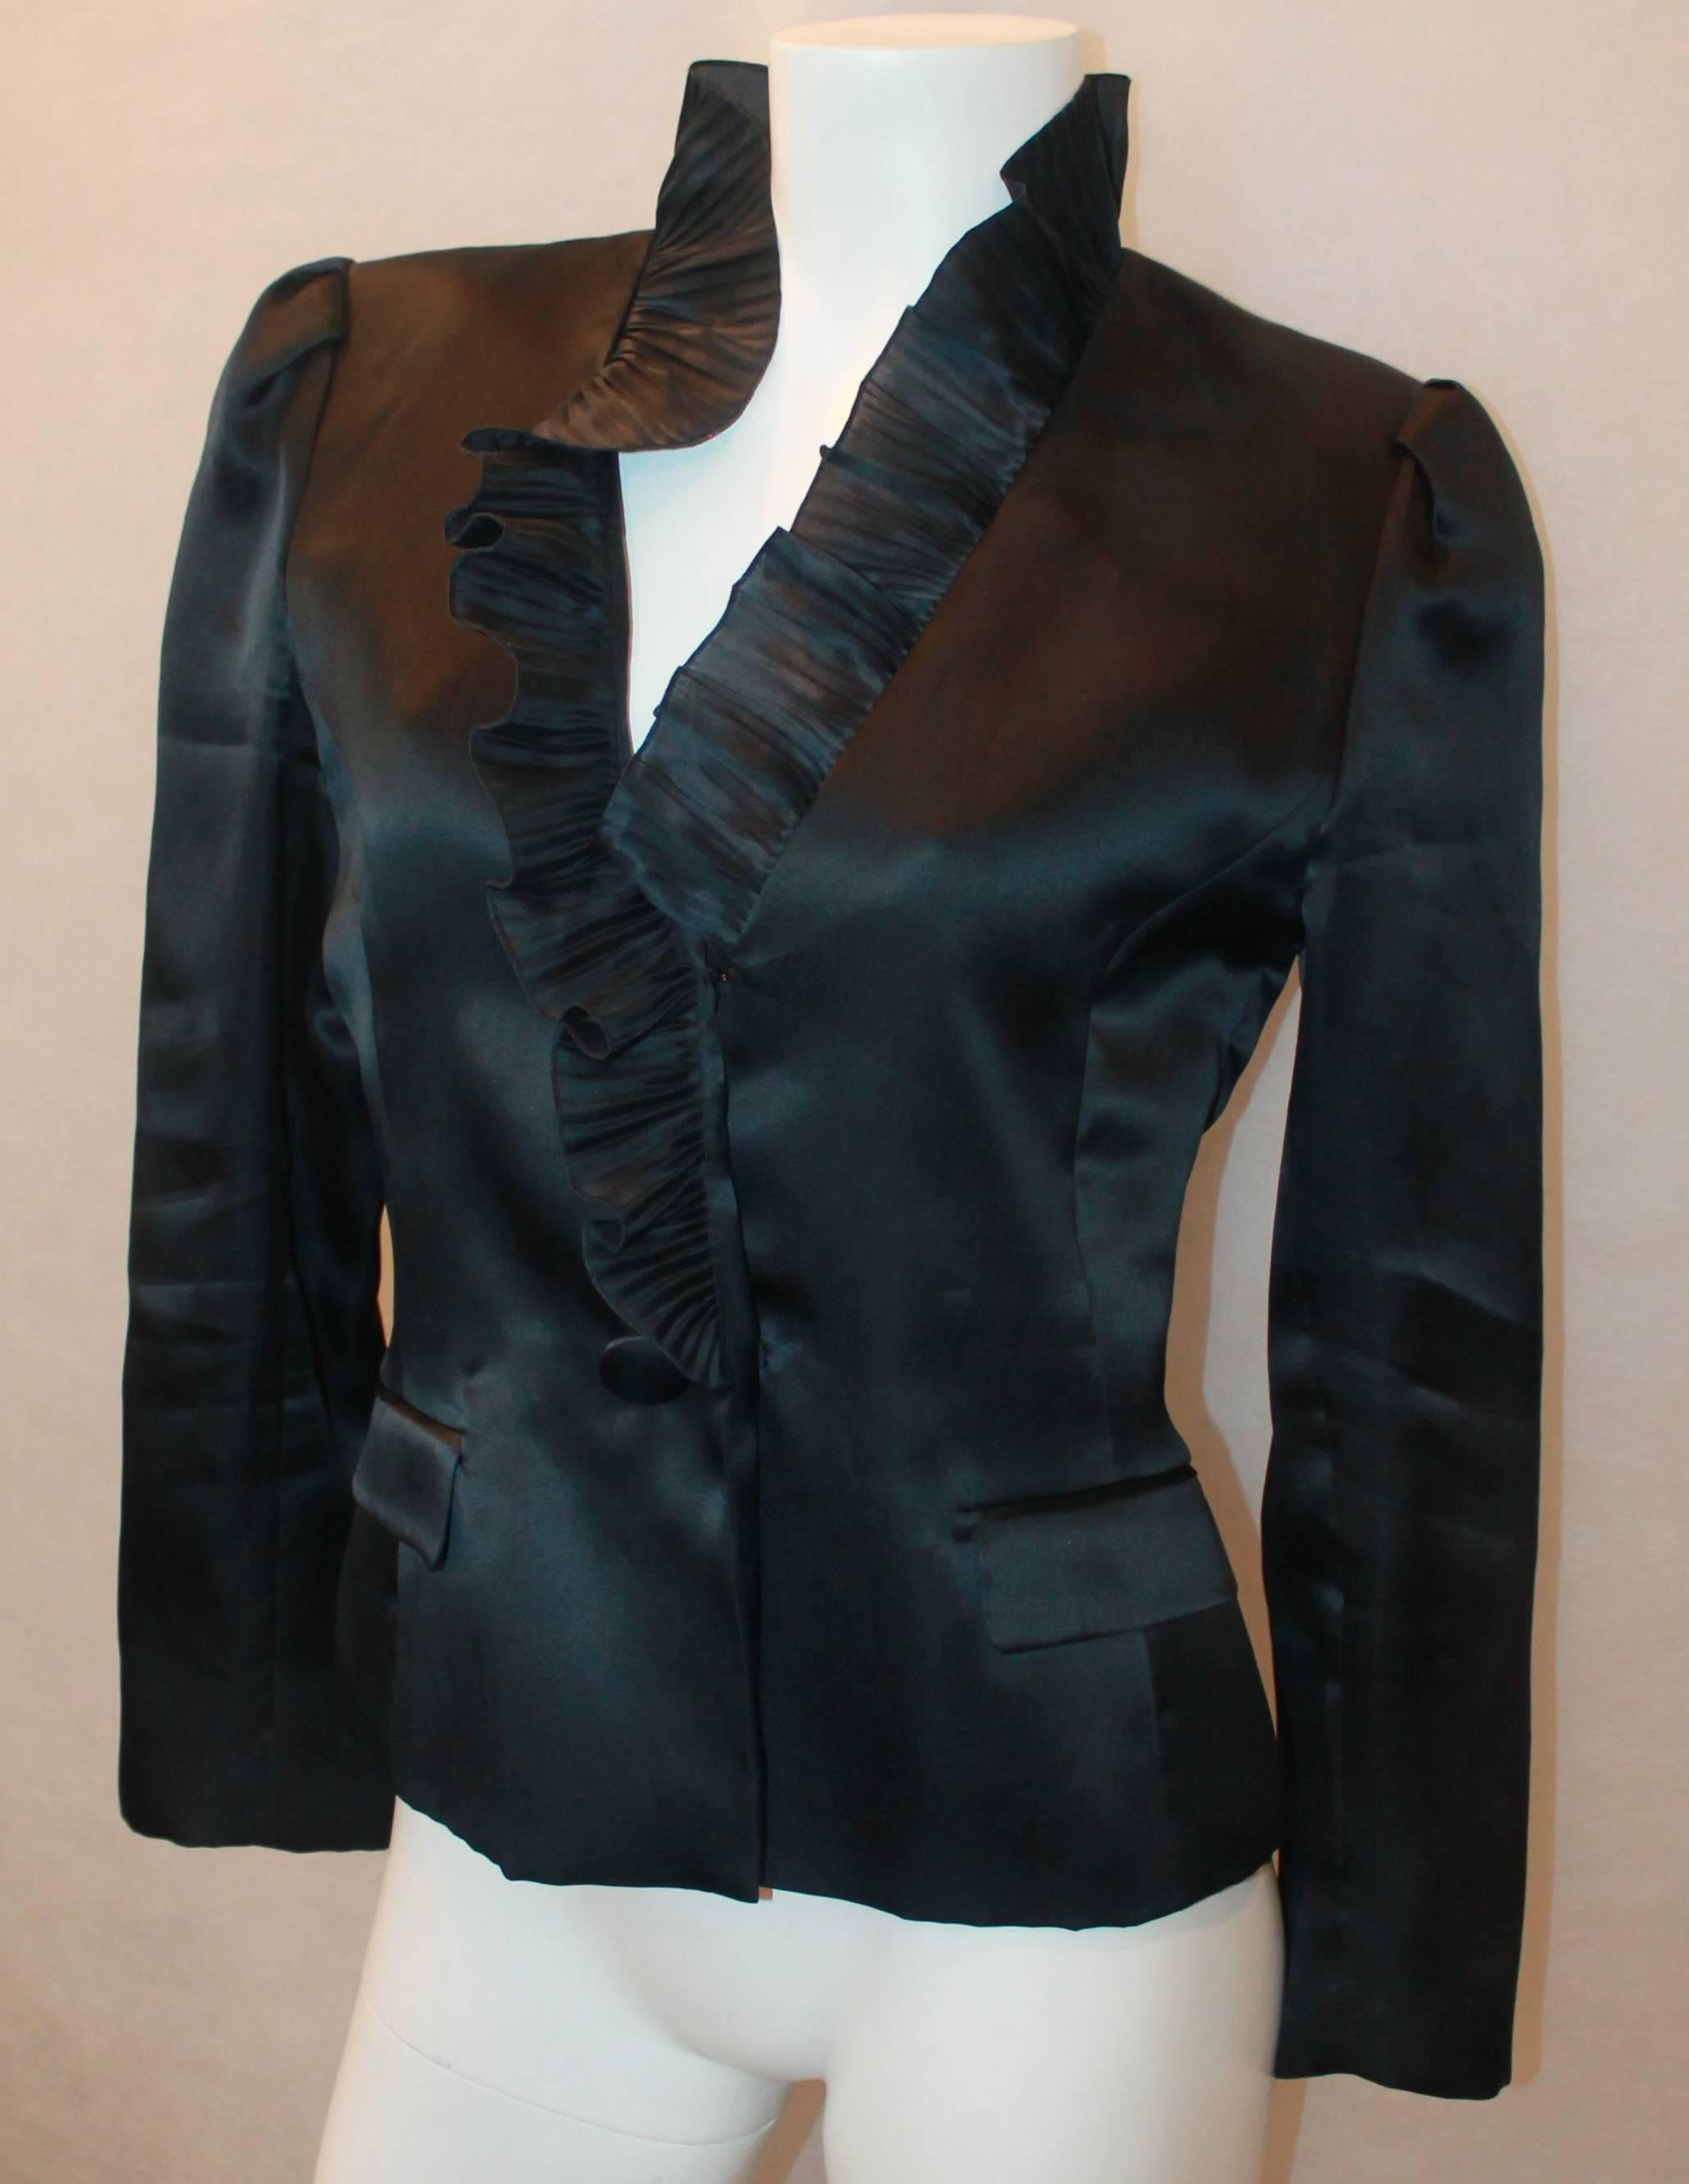 Oscar de la Renta Navy Silk Organza Jacket w/ Pleated Ruffle Collar - 8.  This beautiful jacket is in excellent condition.  It features two front pockets, a fitted style, a pleated ruffle collar, shoulder padding, navy silk buttons on the front and